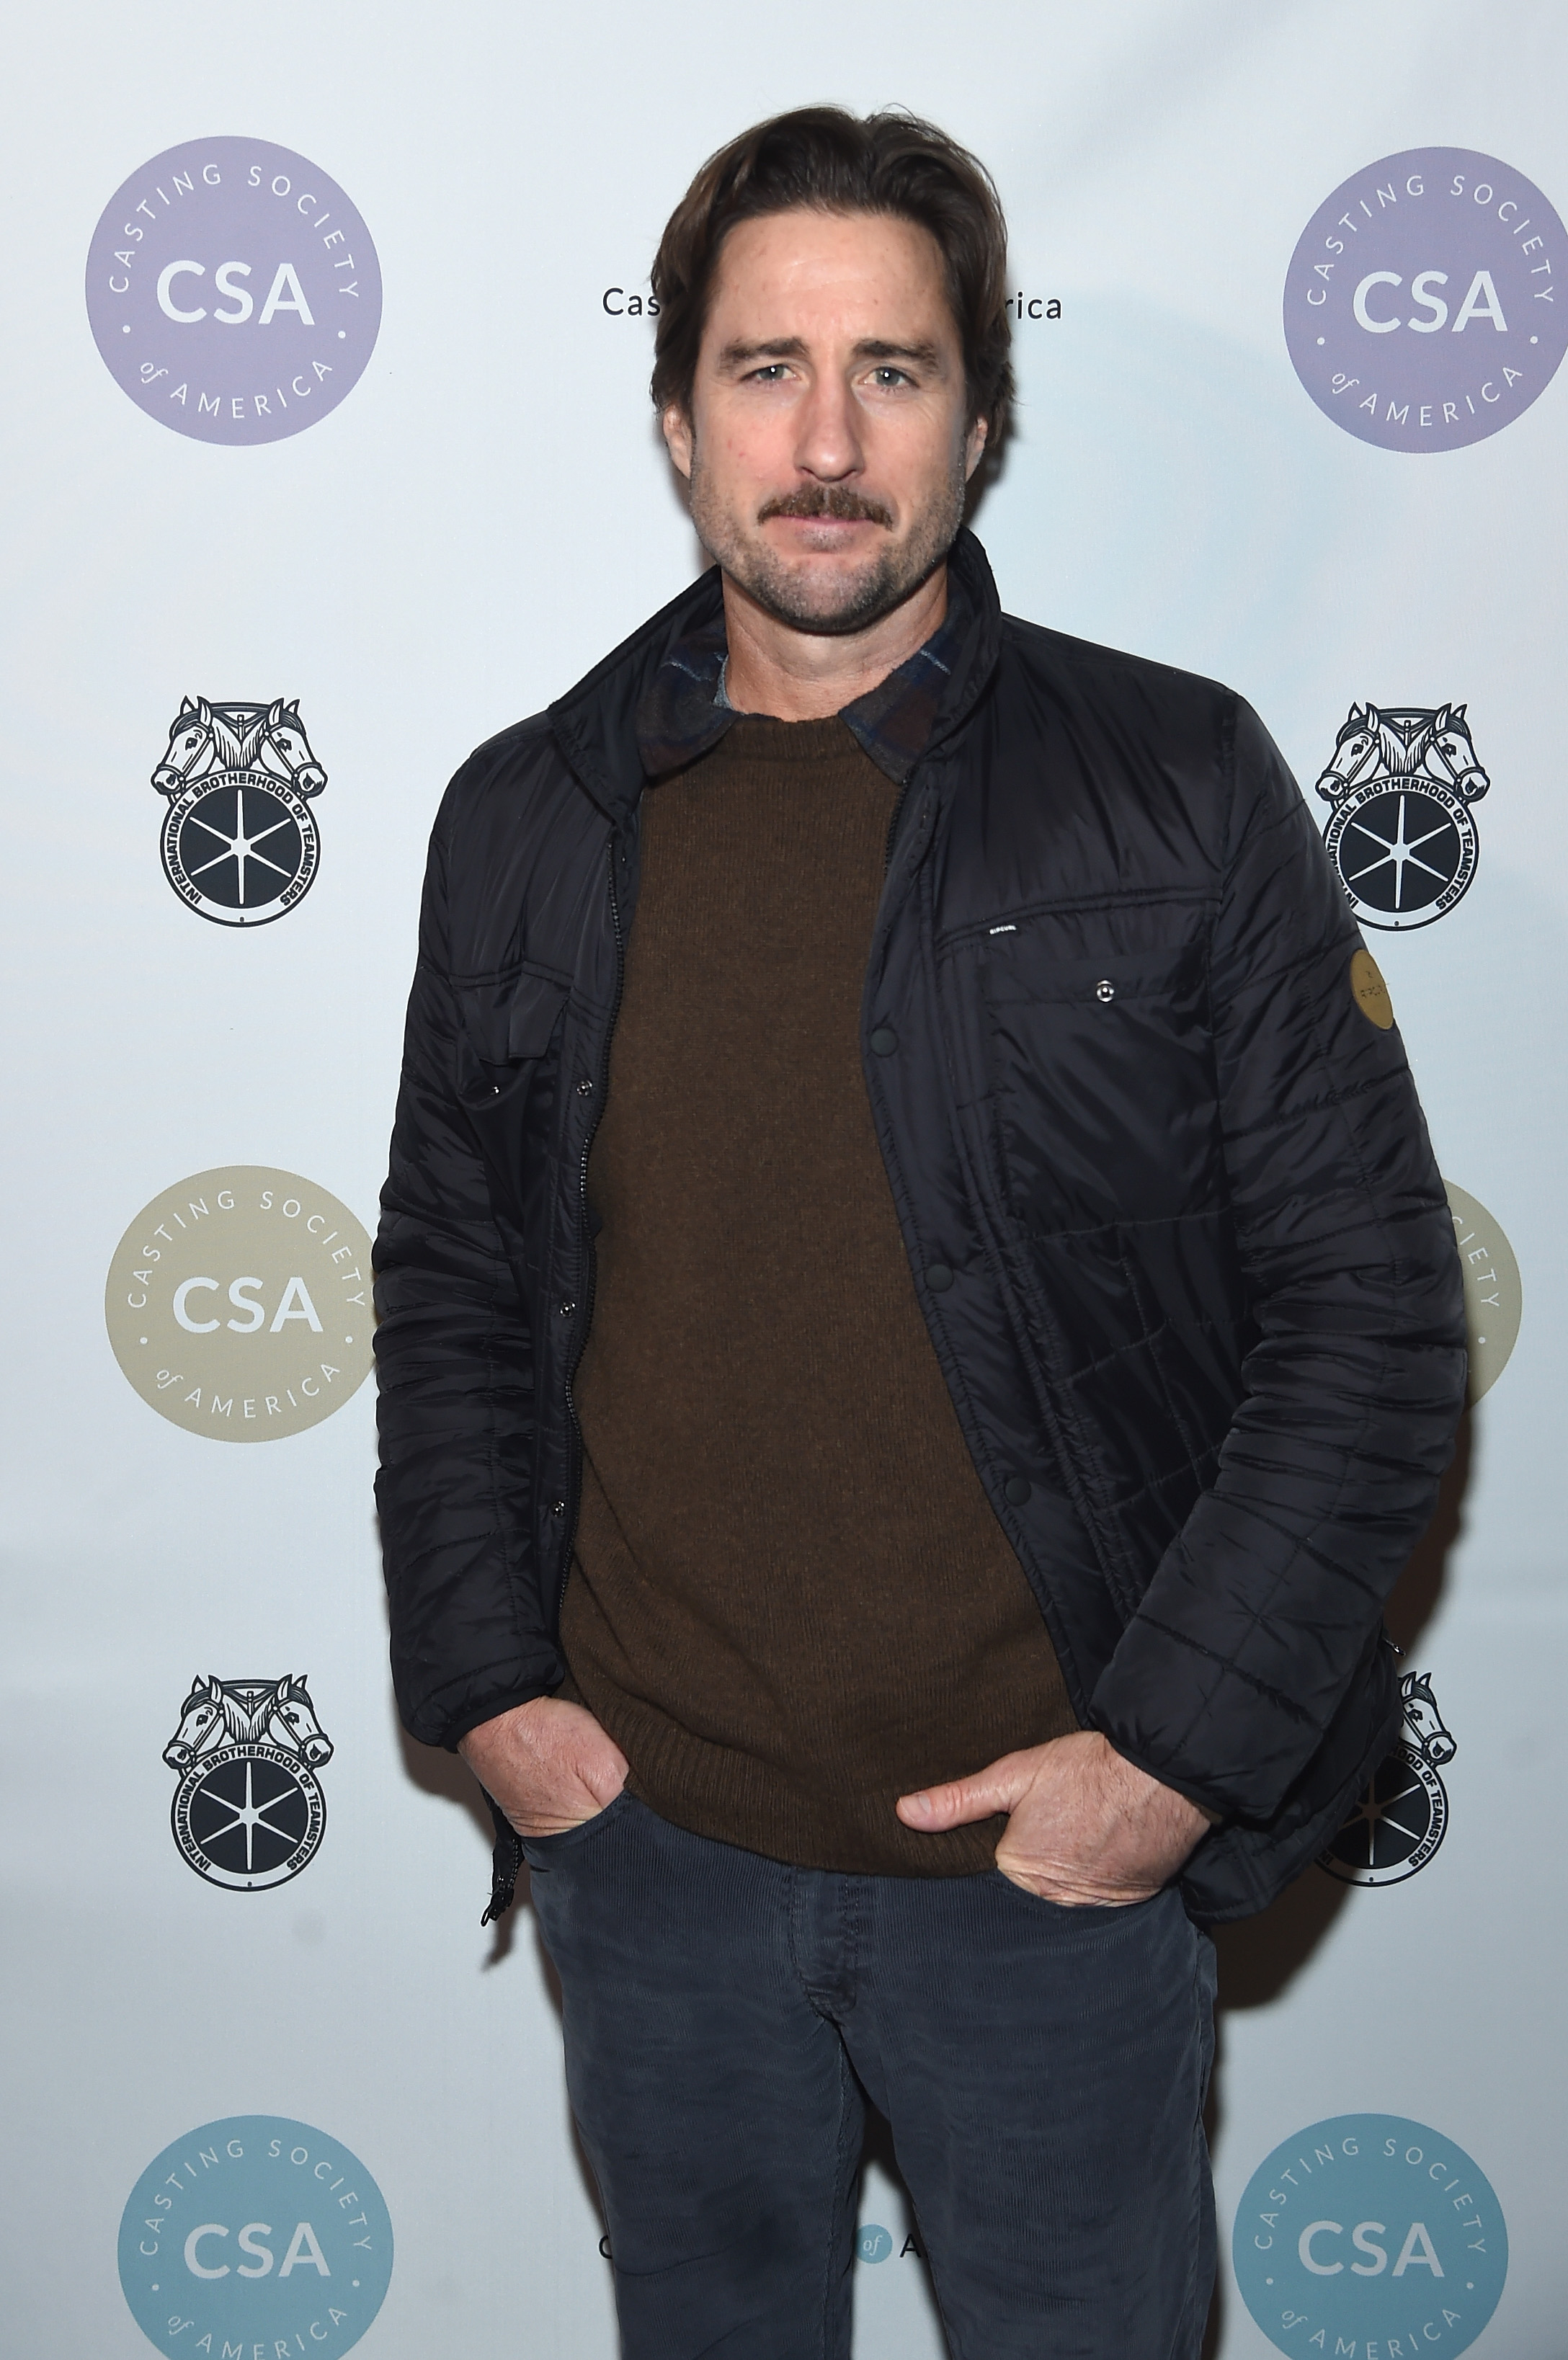 Luke Wilson attends the Casting Society of America's 33rd annual Artios Awards in New York City, on January 18, 2018. | Source: Getty Images